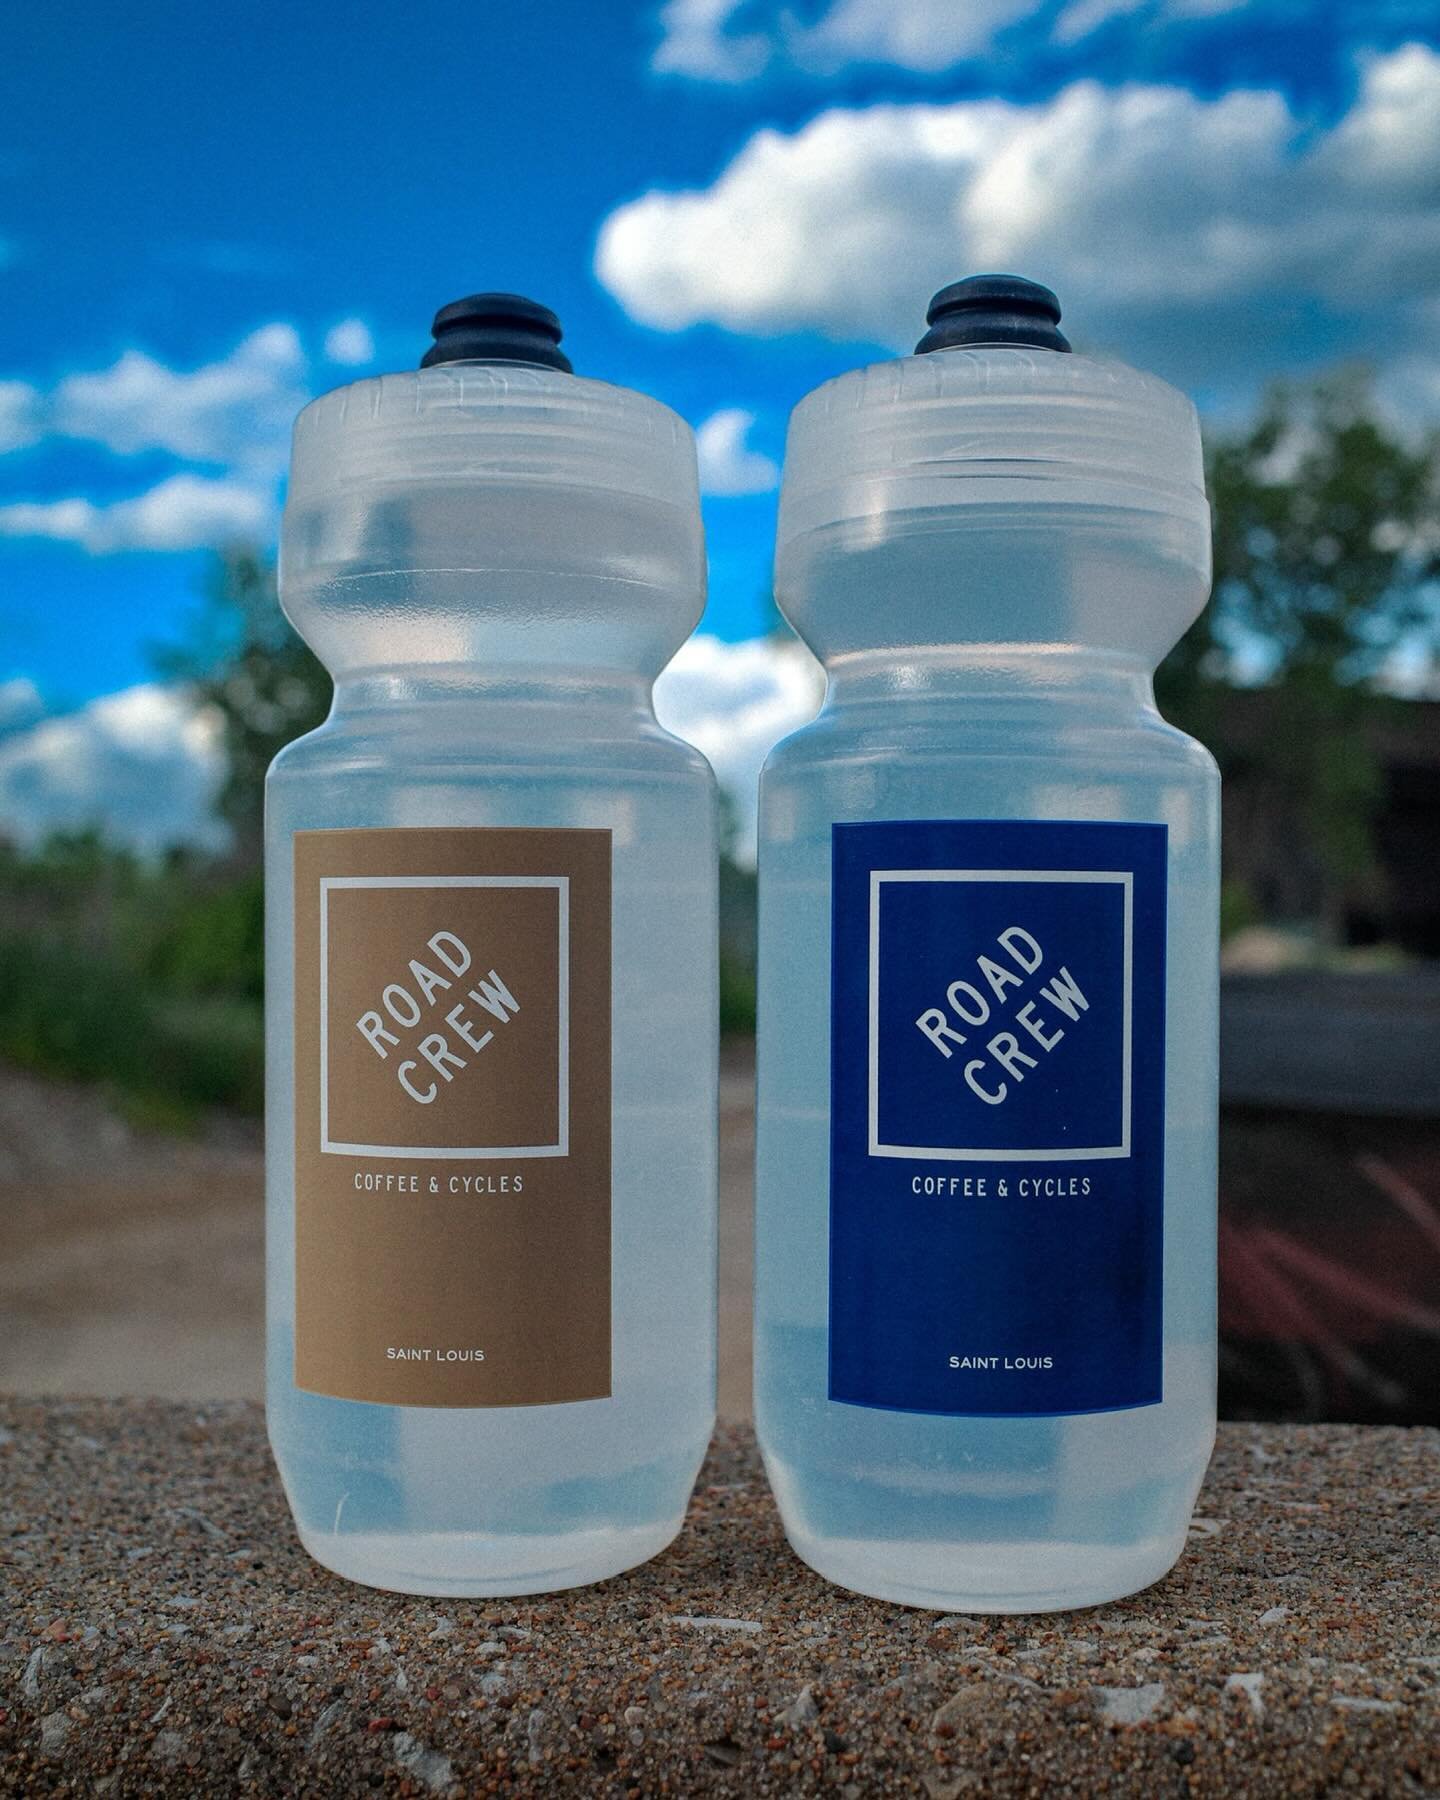 Introducing our new SIGN Bottles! 🔶
Our new water bottles feature a new emblem. This nods to the ROAD WORK AHEAD signs commonly seen on the streets. These signs often inspire us to take a different route on our bikes, which we find excitement in the